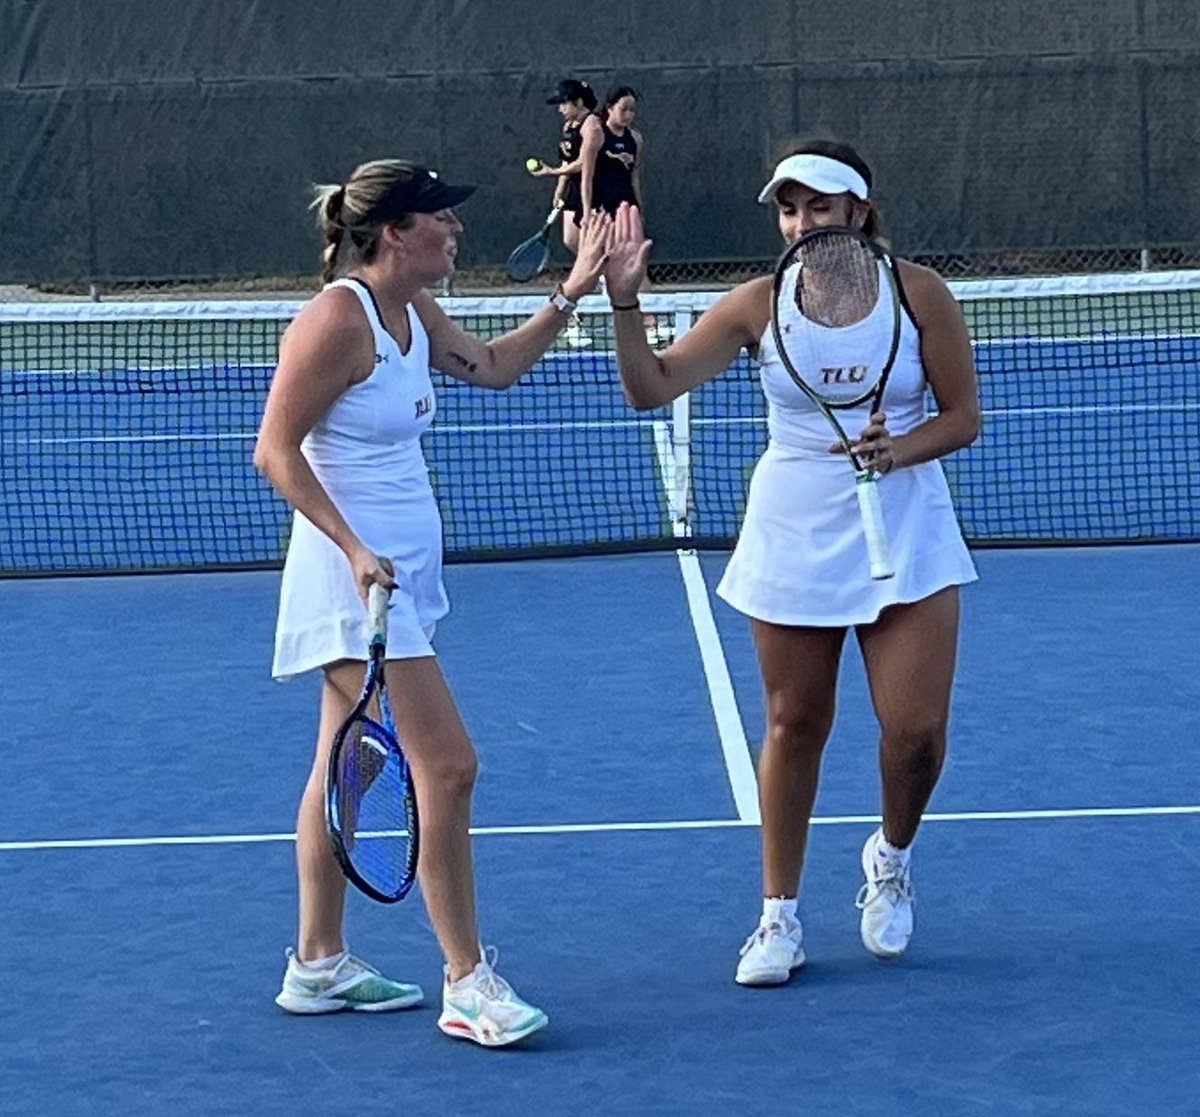 Let’s GO!!! Kaitlyn and Victoria with 4 huge wins between them on day 1 of the Regional ITA Championships at Trinity University! #bulldogtennis #pupsup